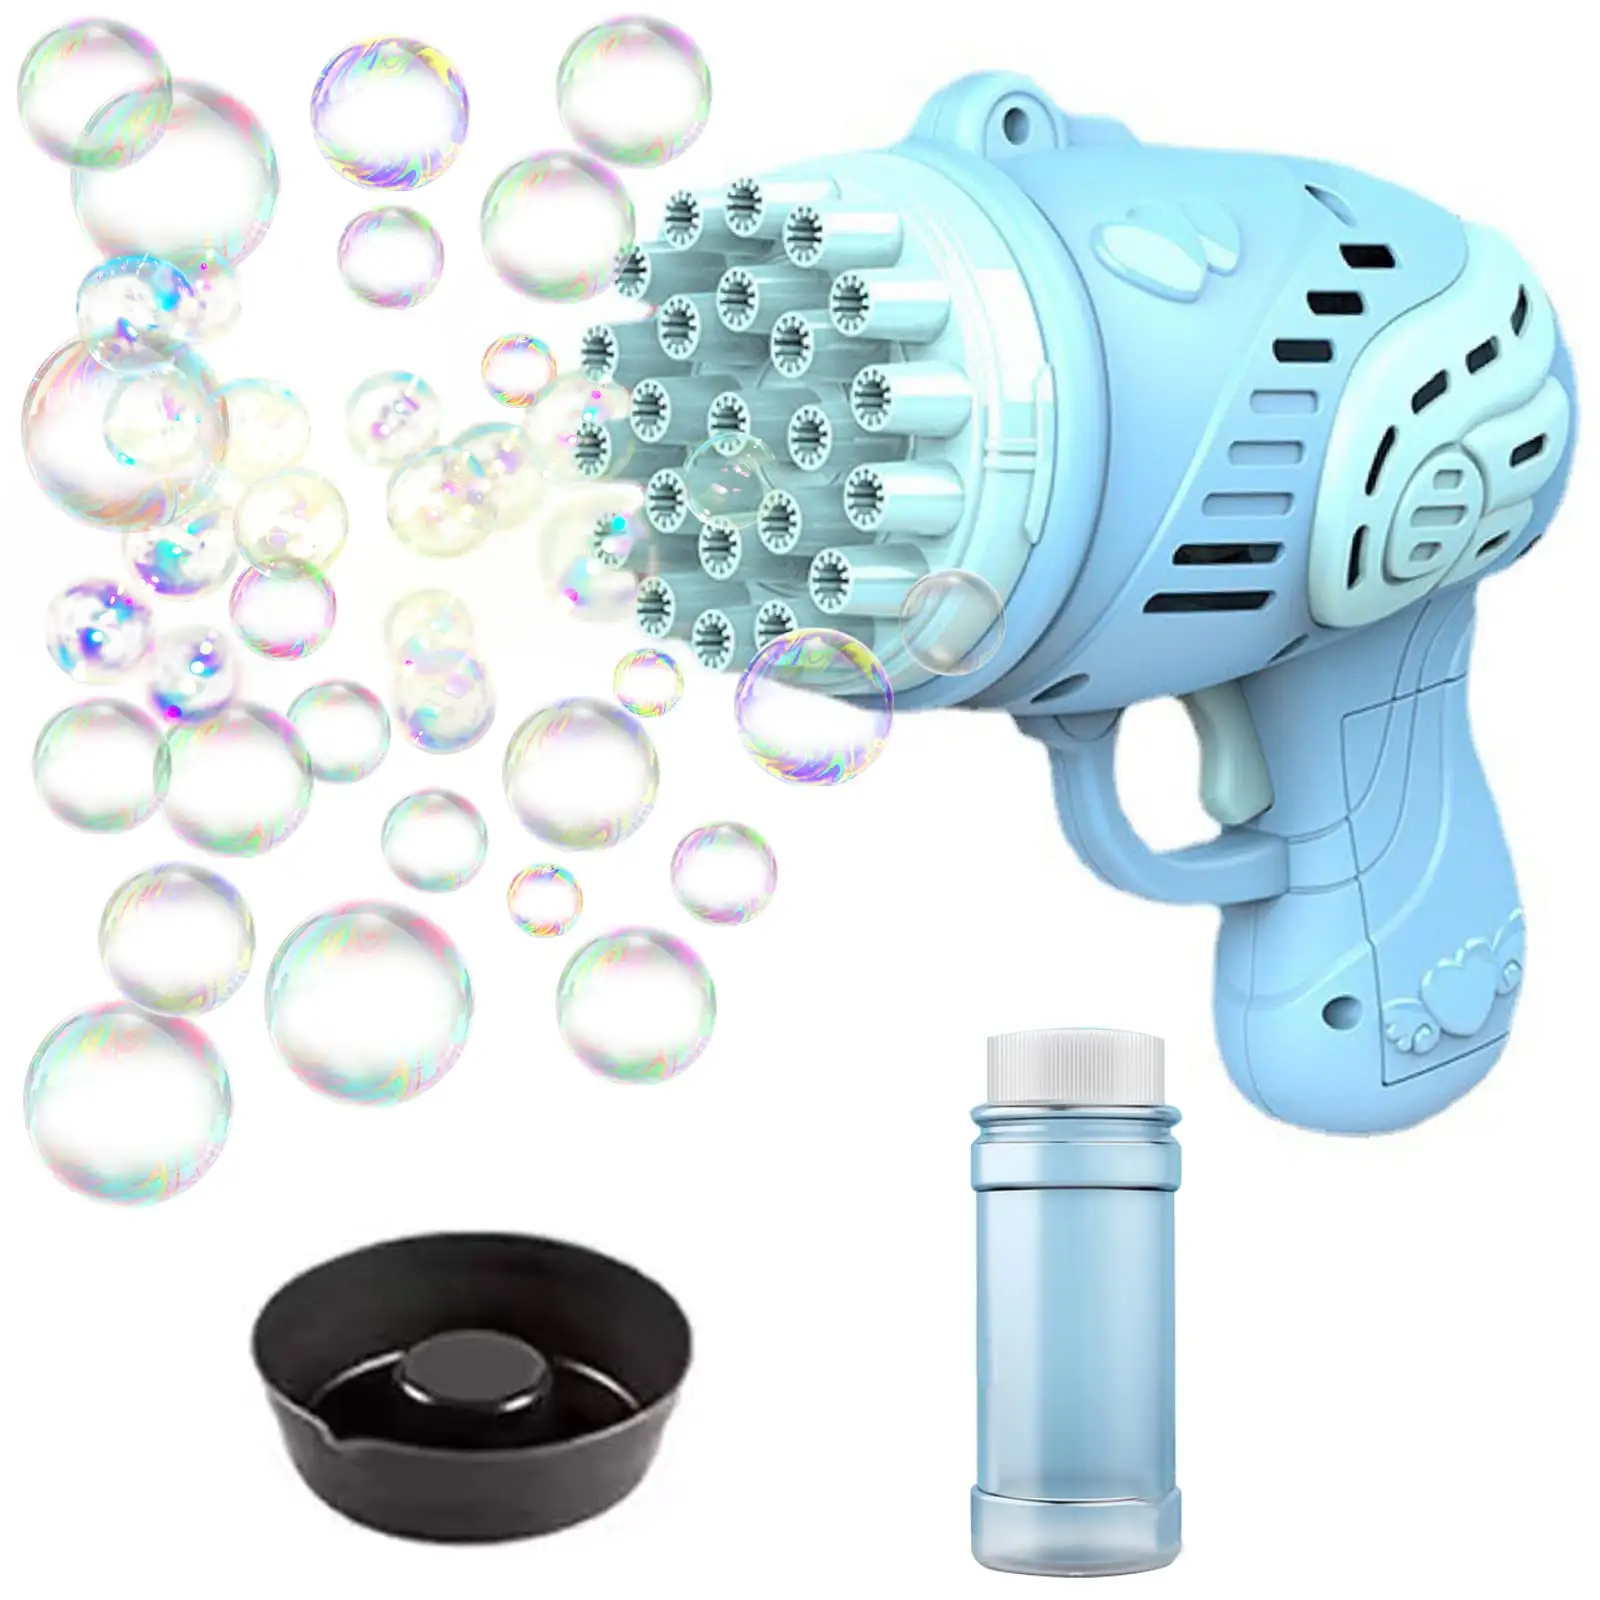 23 Hole Bubble Gun Bubble Blowing Water Soap Electric Kids Big Dolphin Electric Soap Toys With Music And Light Bubble Guns